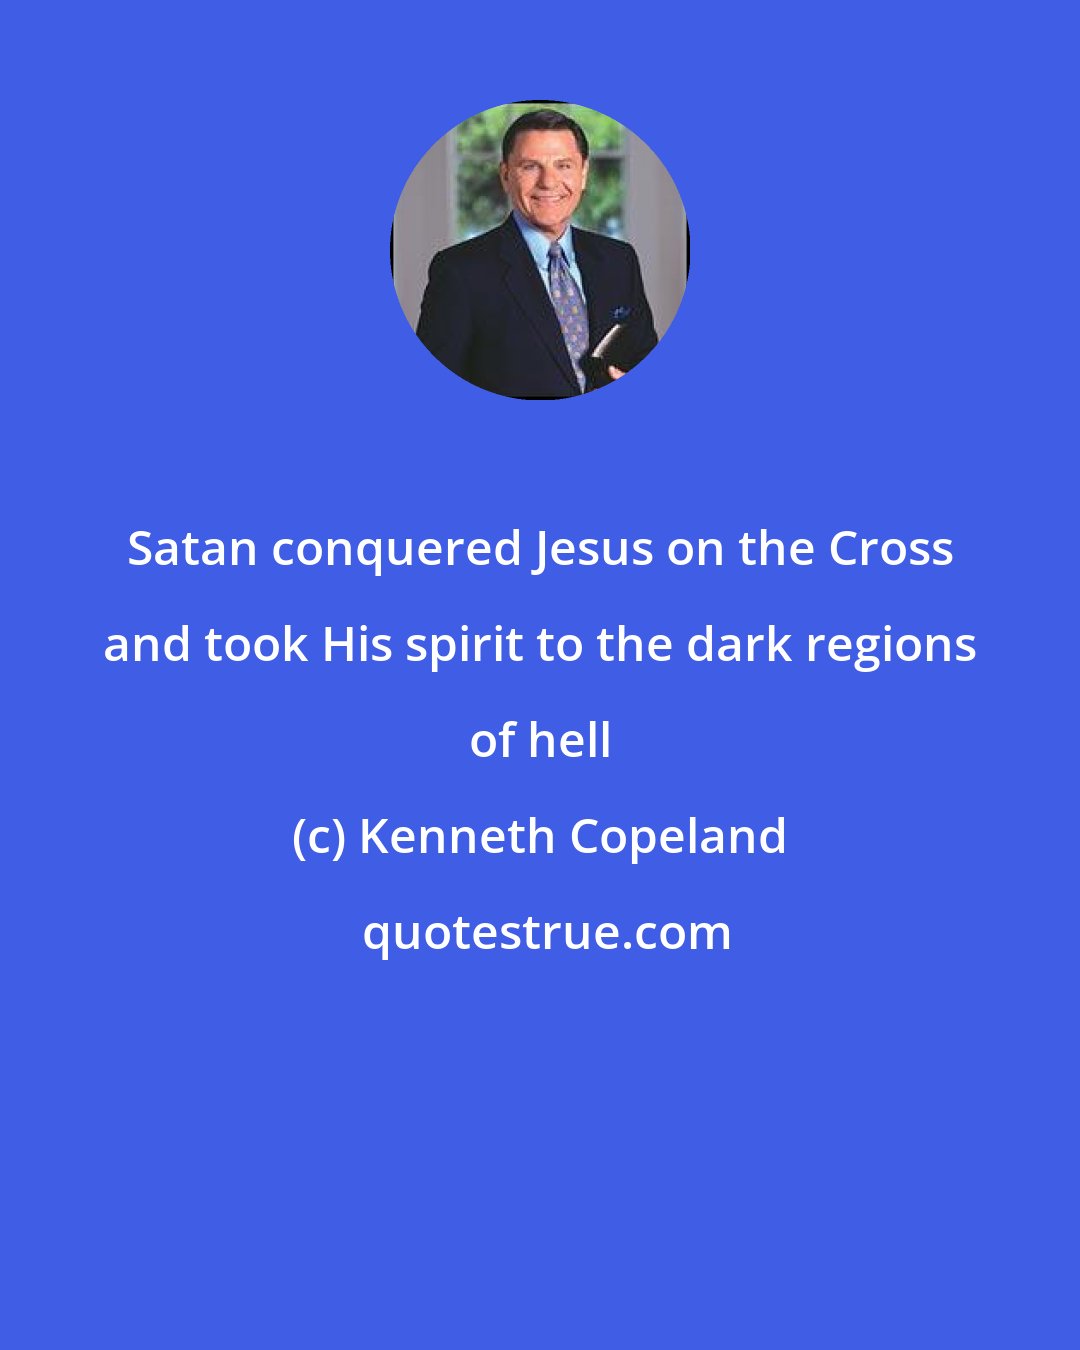 Kenneth Copeland: Satan conquered Jesus on the Cross and took His spirit to the dark regions of hell